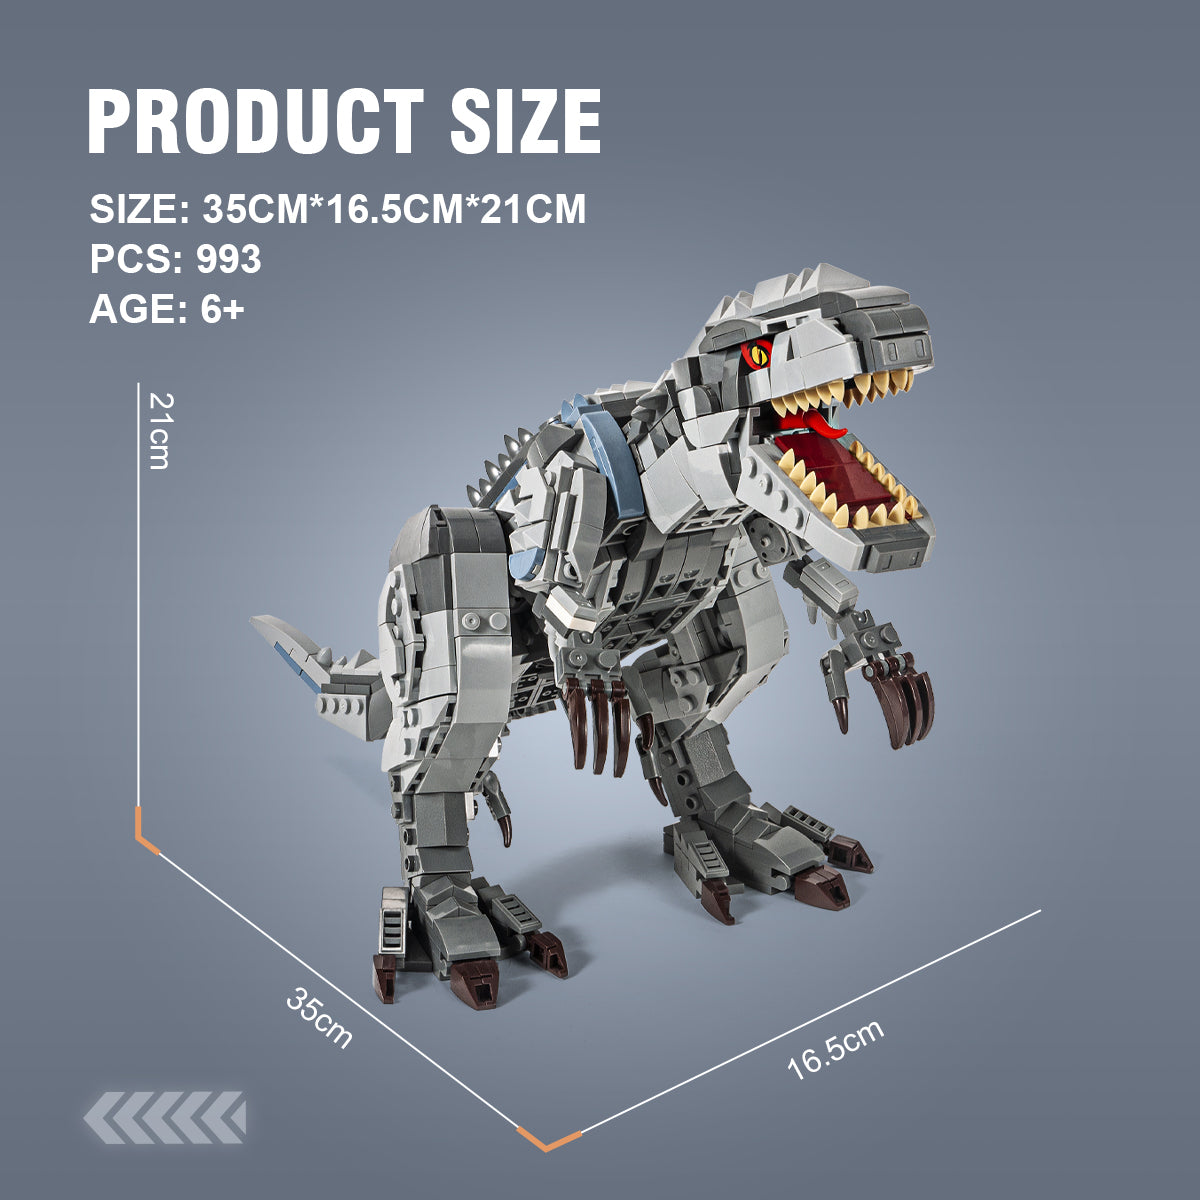 DAHONPA Dinosaur Series Tyrannosaurus Model Building Block Set, with 993 Pieces, Building Blocks Toys Gifts for Kids and Adults